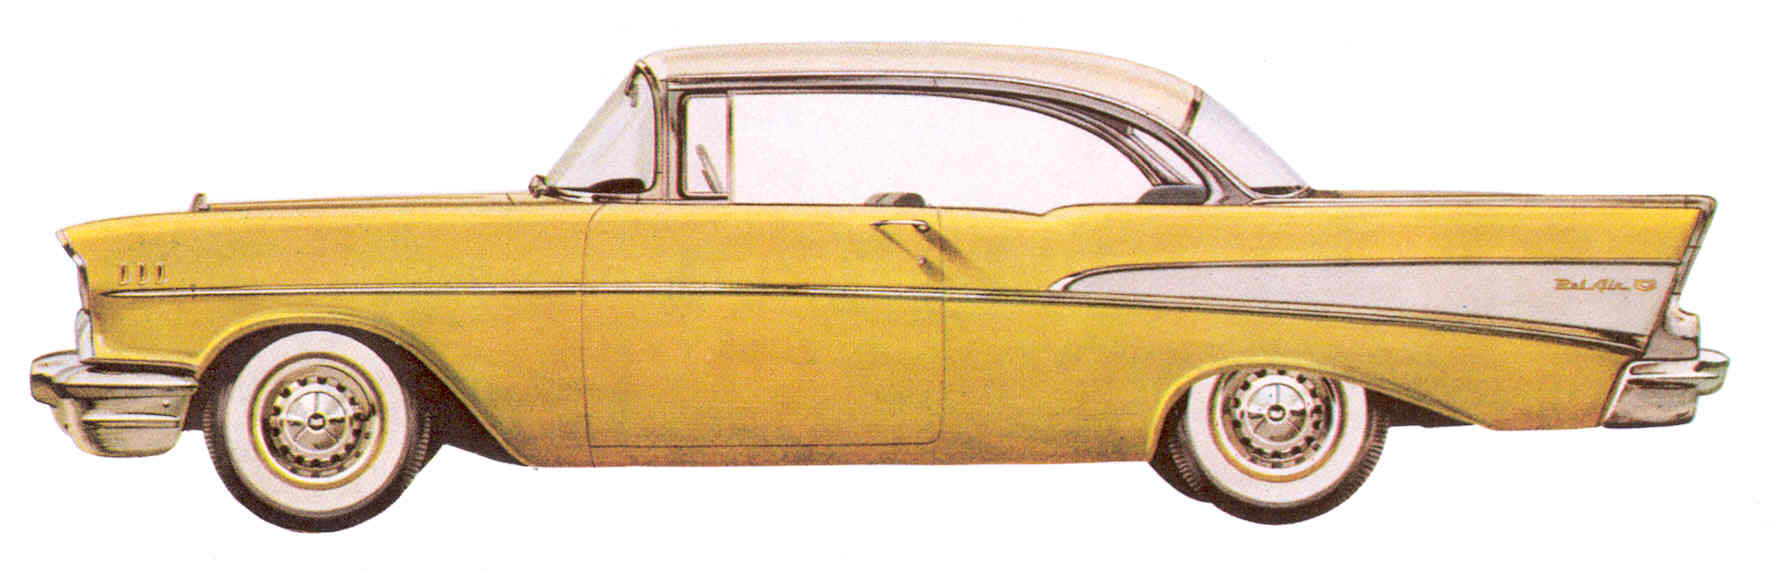 Chevrolet Bel Air sport coupe